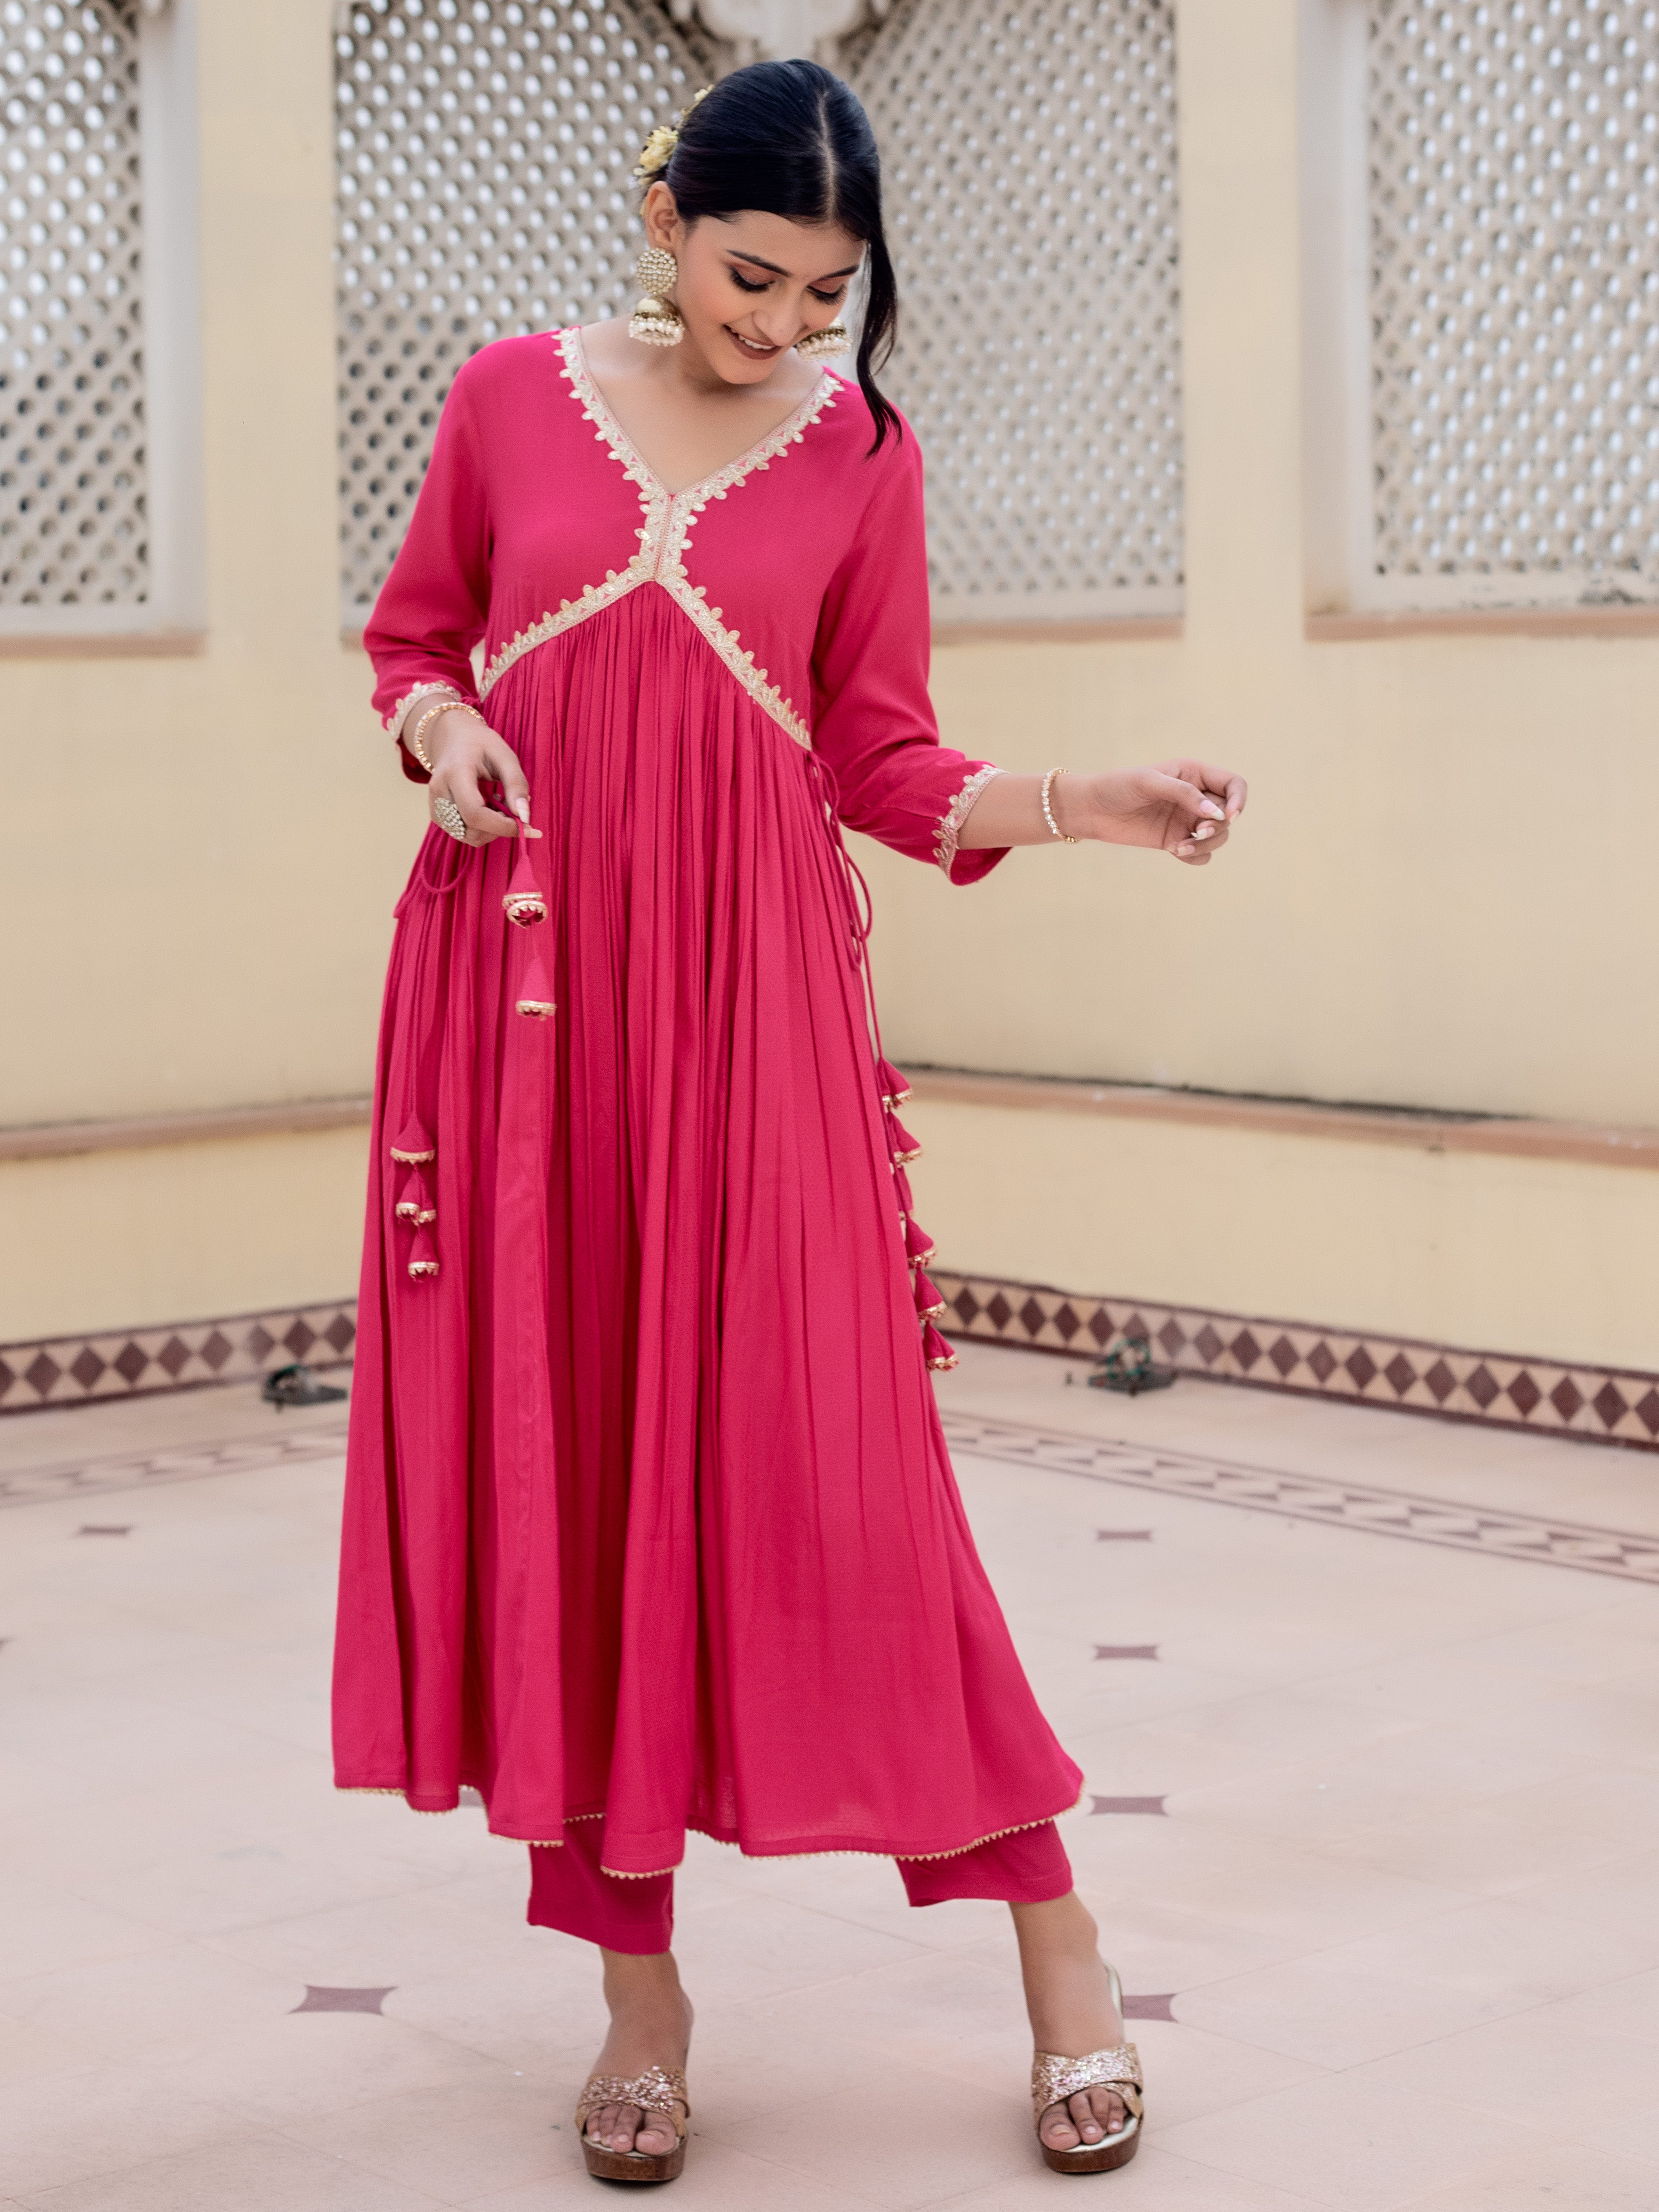 look-effortlessly-stylish-with-this-beautiful-v-neck-pink-a-line-kurta-with-pant-featuring-intricate-lace-detailing-and-side-tassels-this-kurta-is-sure-to-make-a-statement-and-is-perfect-for-a-variety-of-occasions